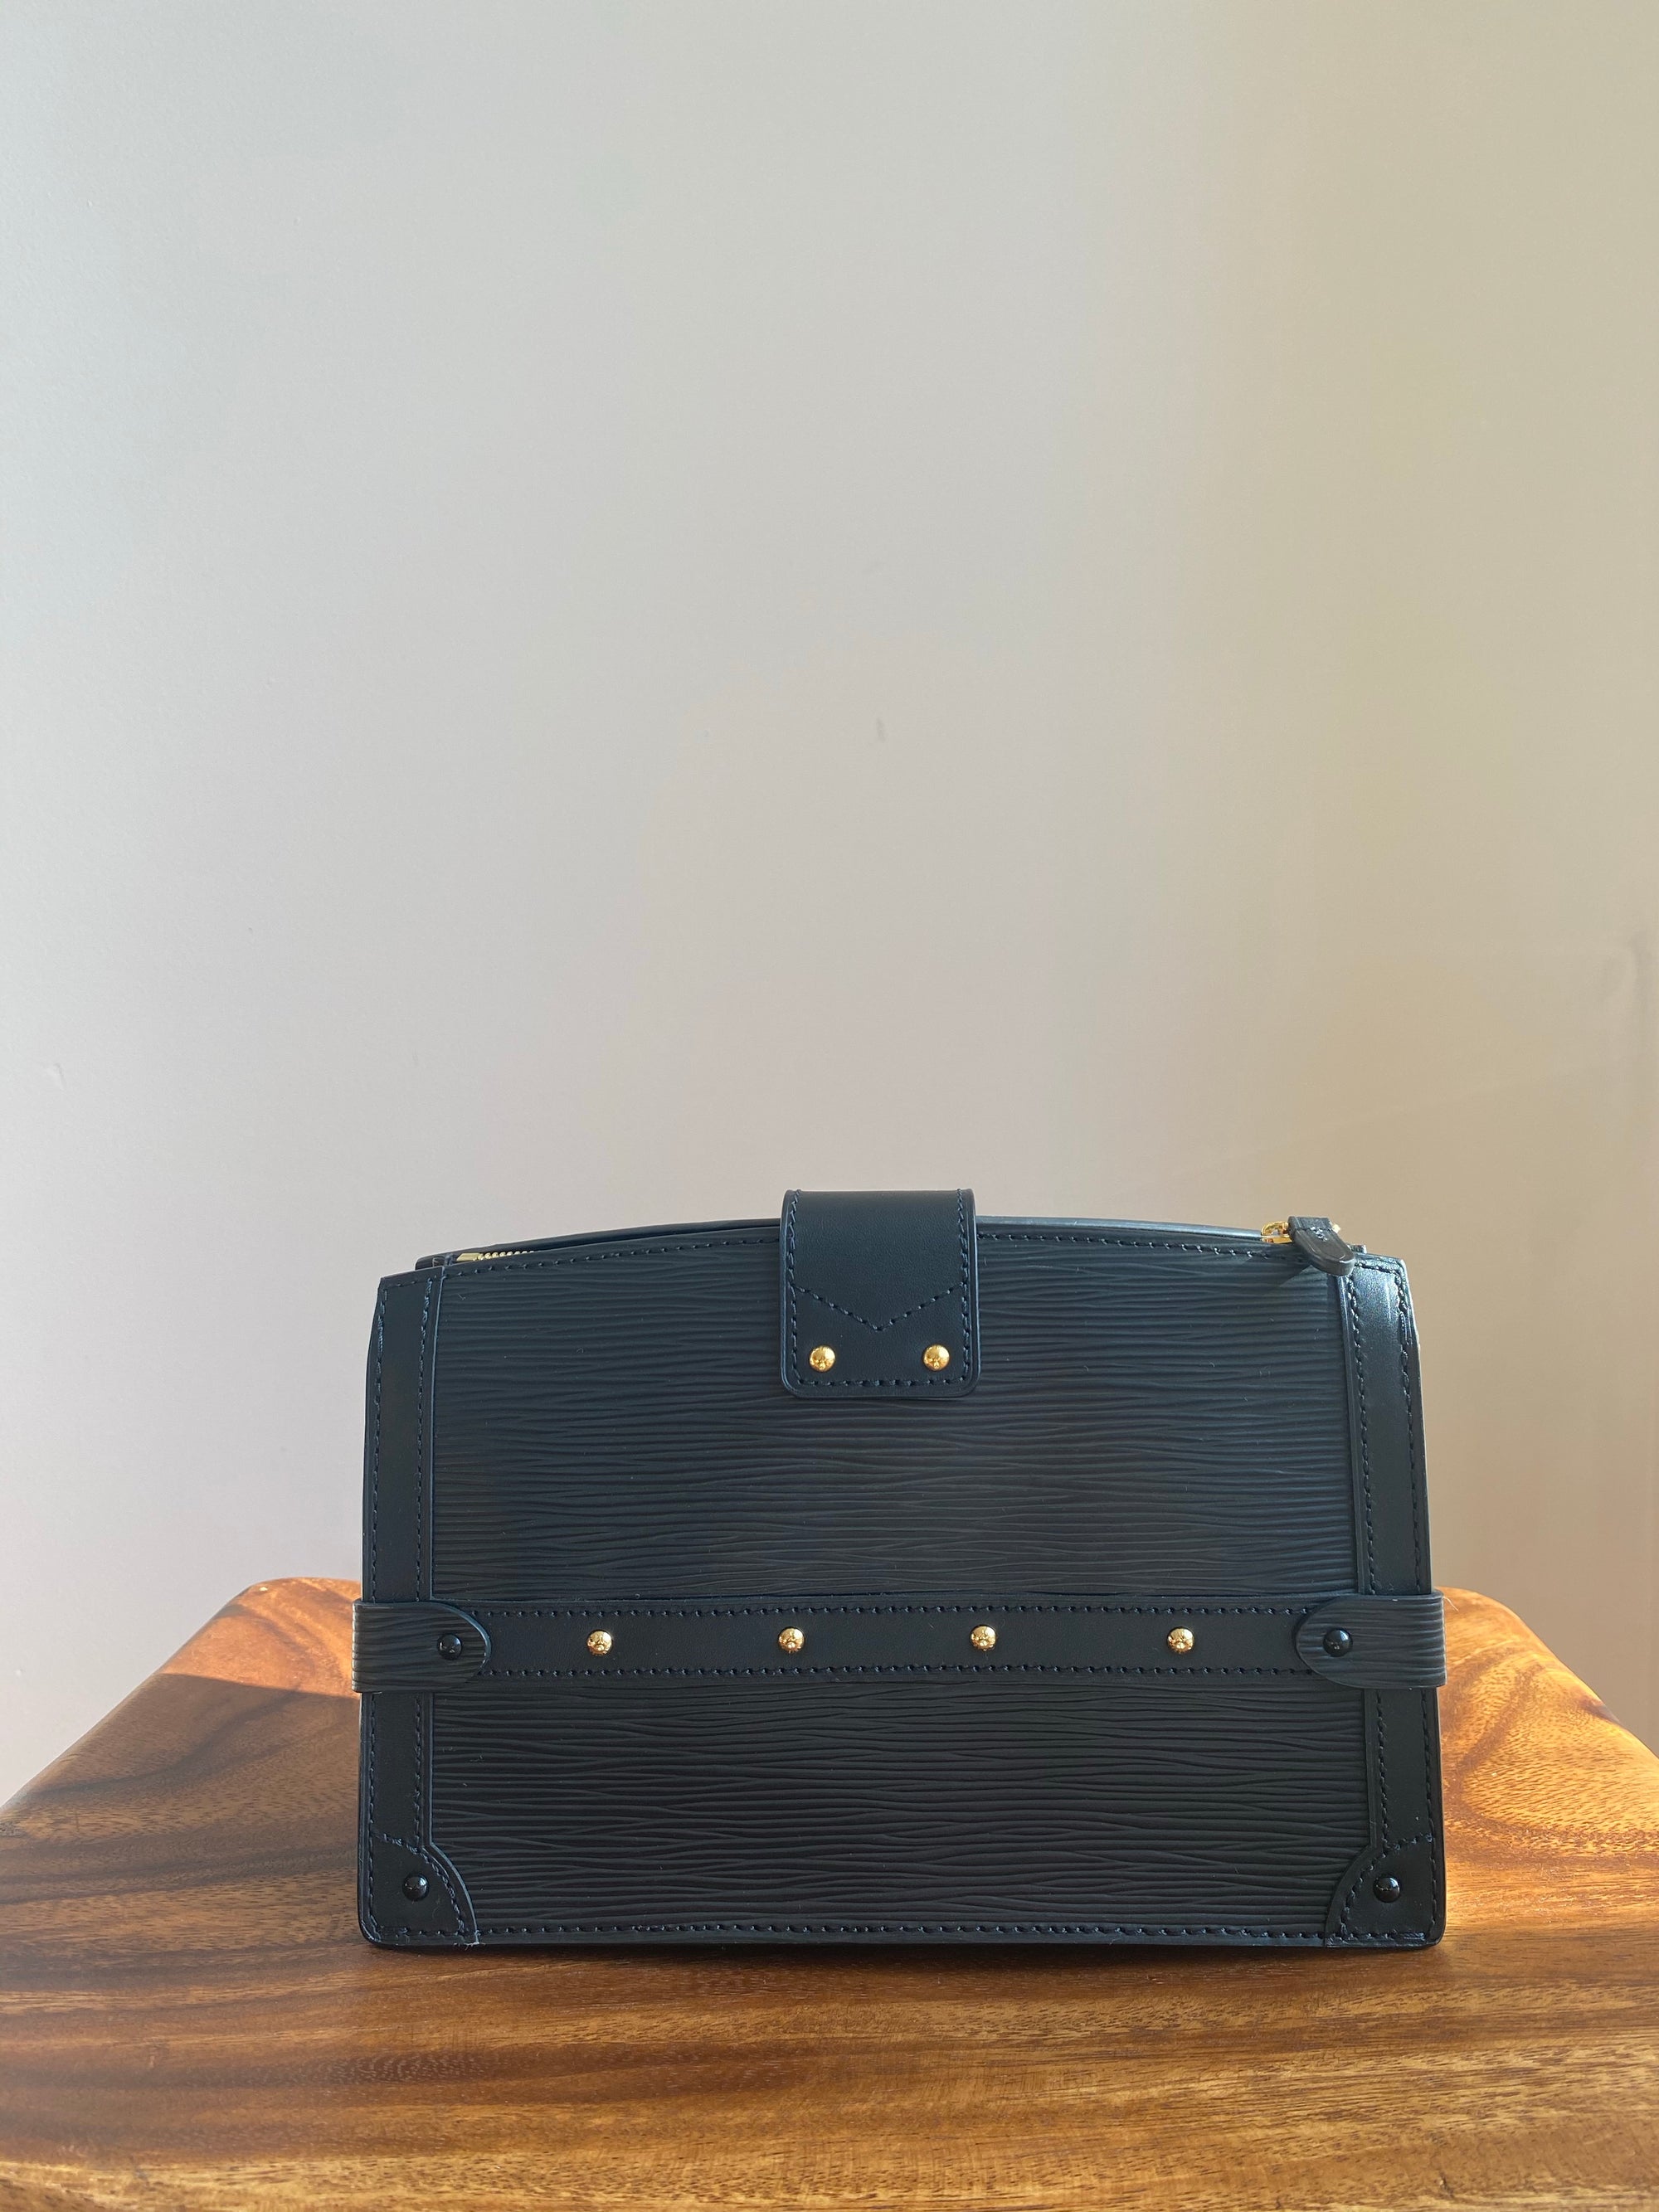 WHY I returned Louis Vuitton TRUNK CLUTCH/ Chanel LV 